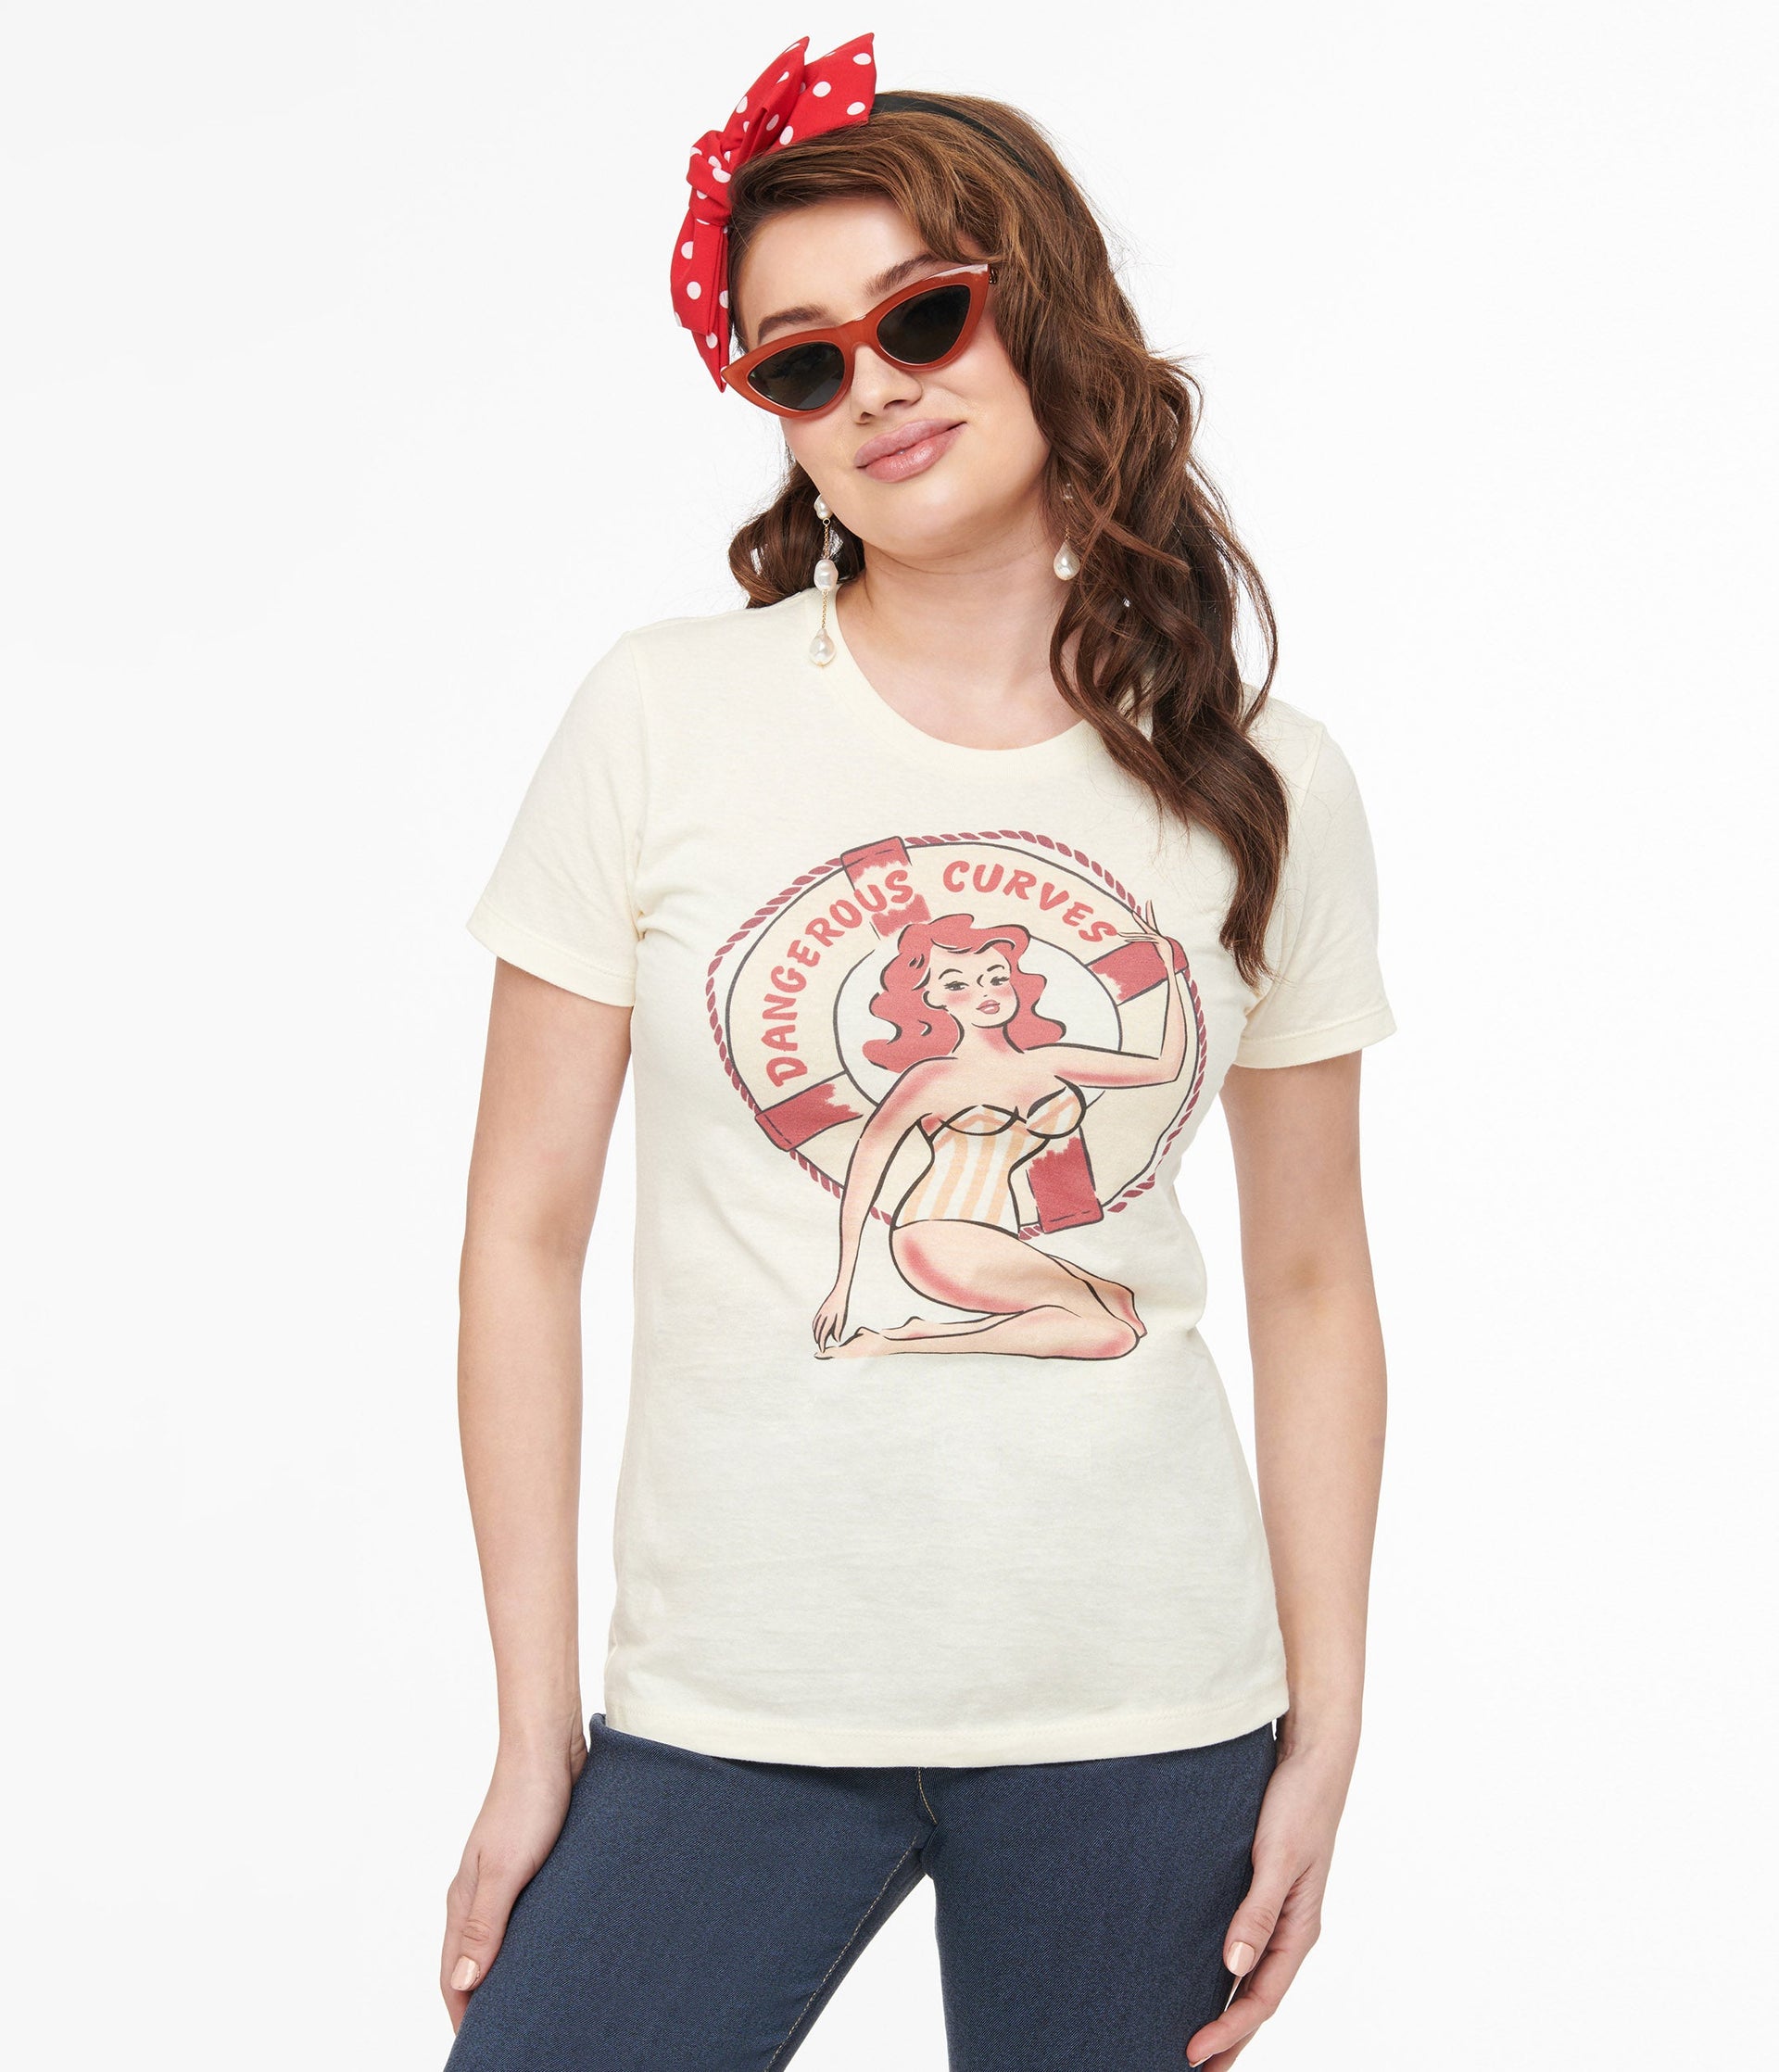 Dangerous Curves Cotton Graphic Fitted Tee - Unique Vintage - Womens, GRAPHIC TEES, TEES